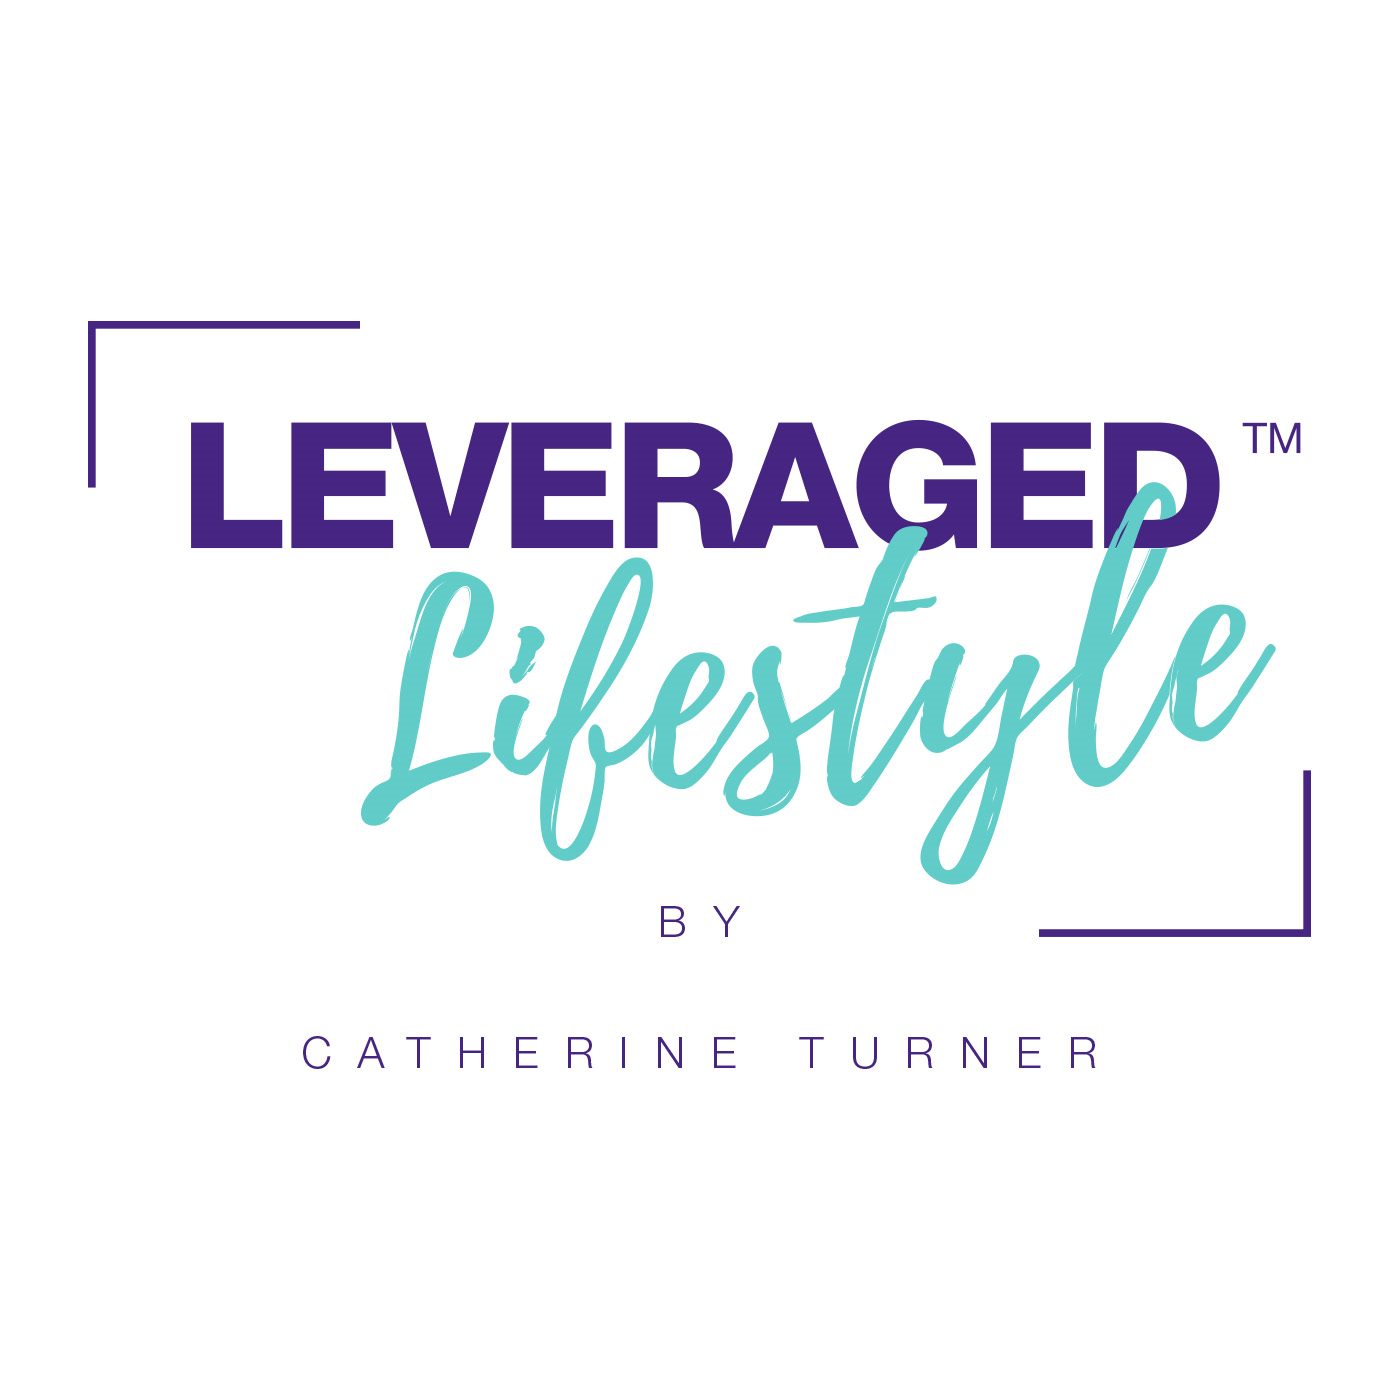 Special - What Does a Leveraged Lifestyle Mean to You?